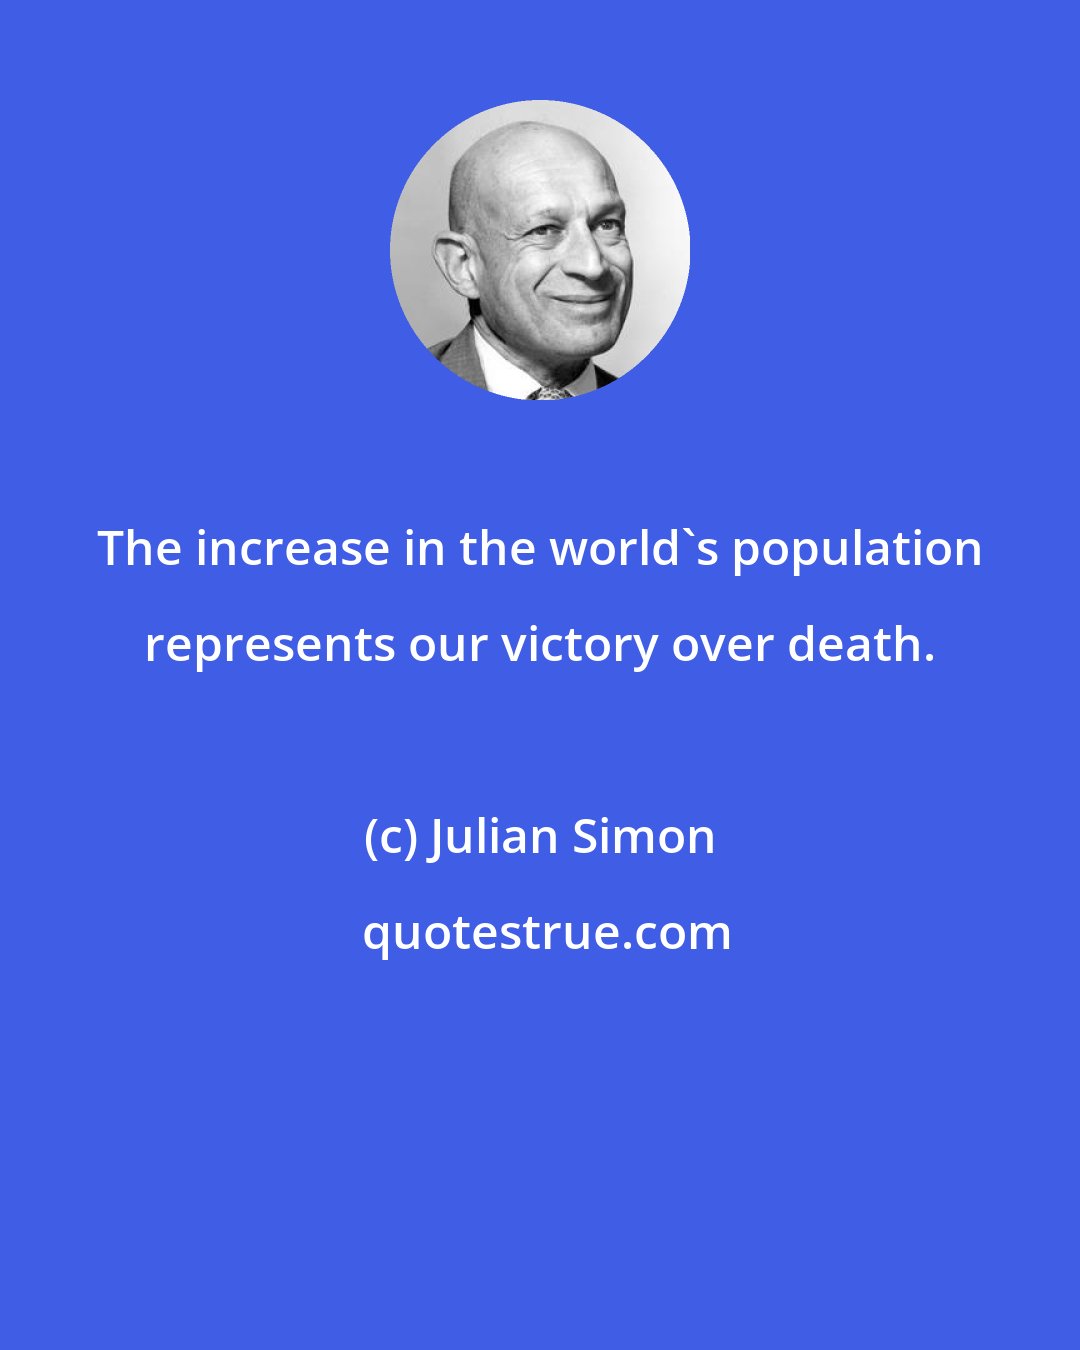 Julian Simon: The increase in the world's population represents our victory over death.